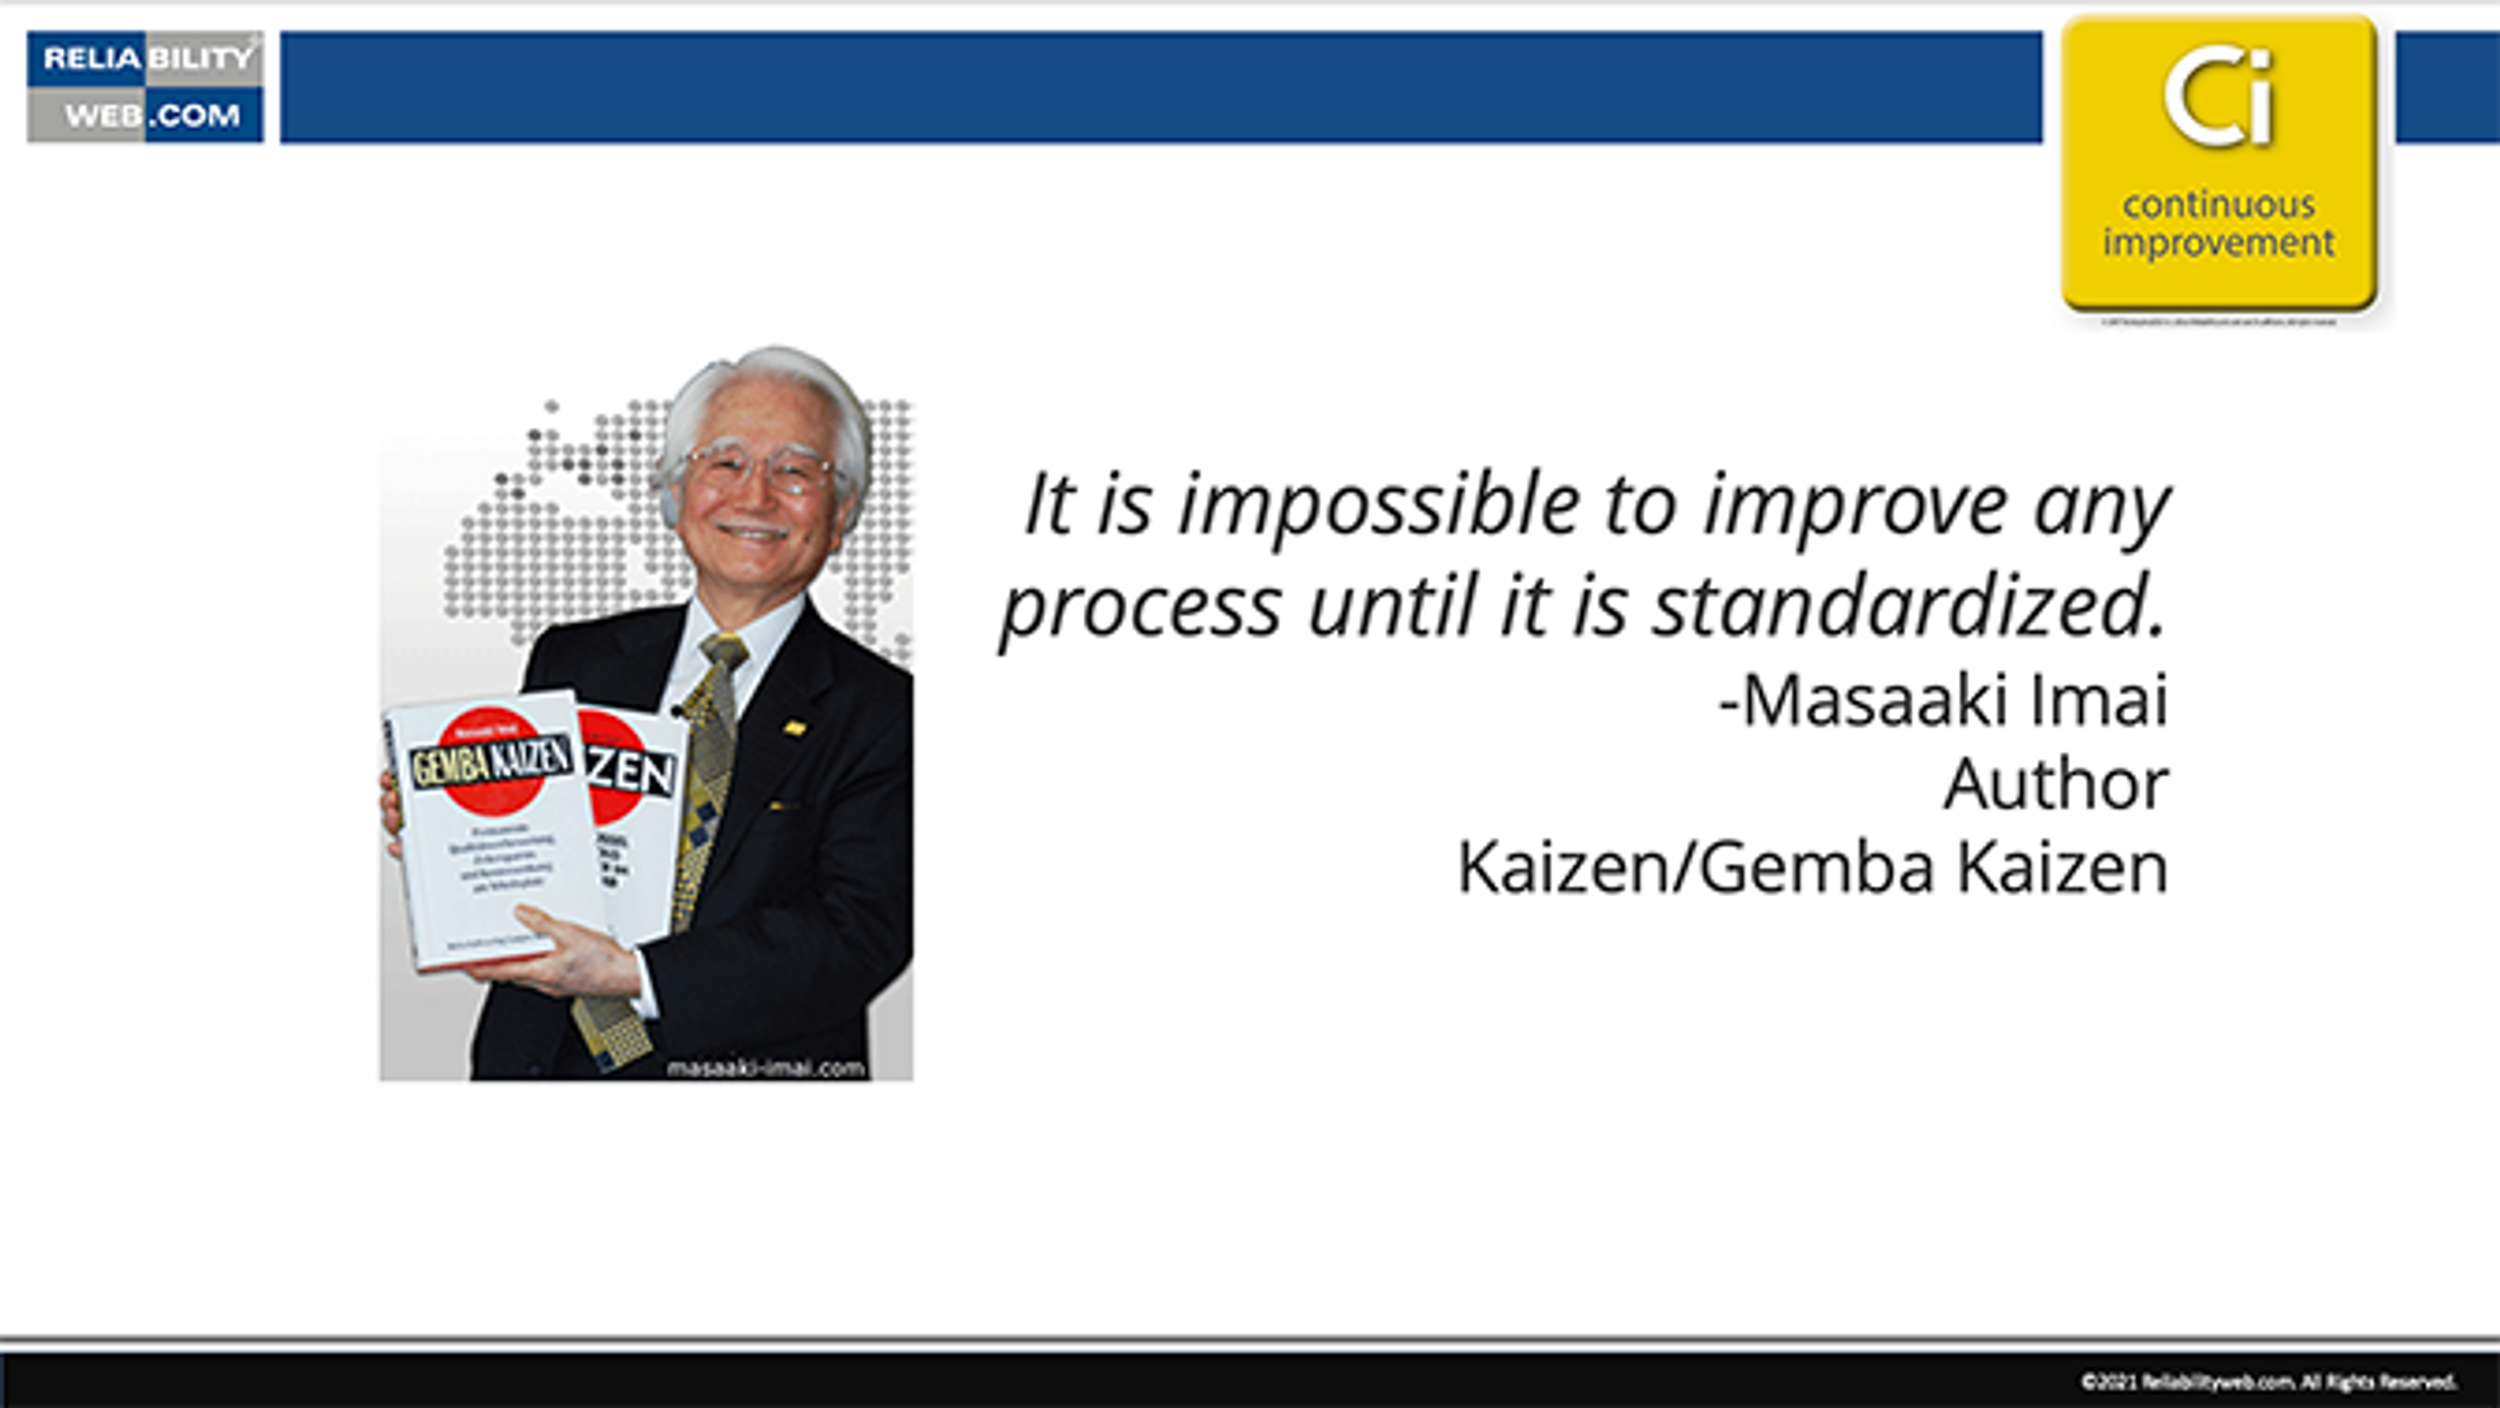 It is impossible to improve any process until it is standardized